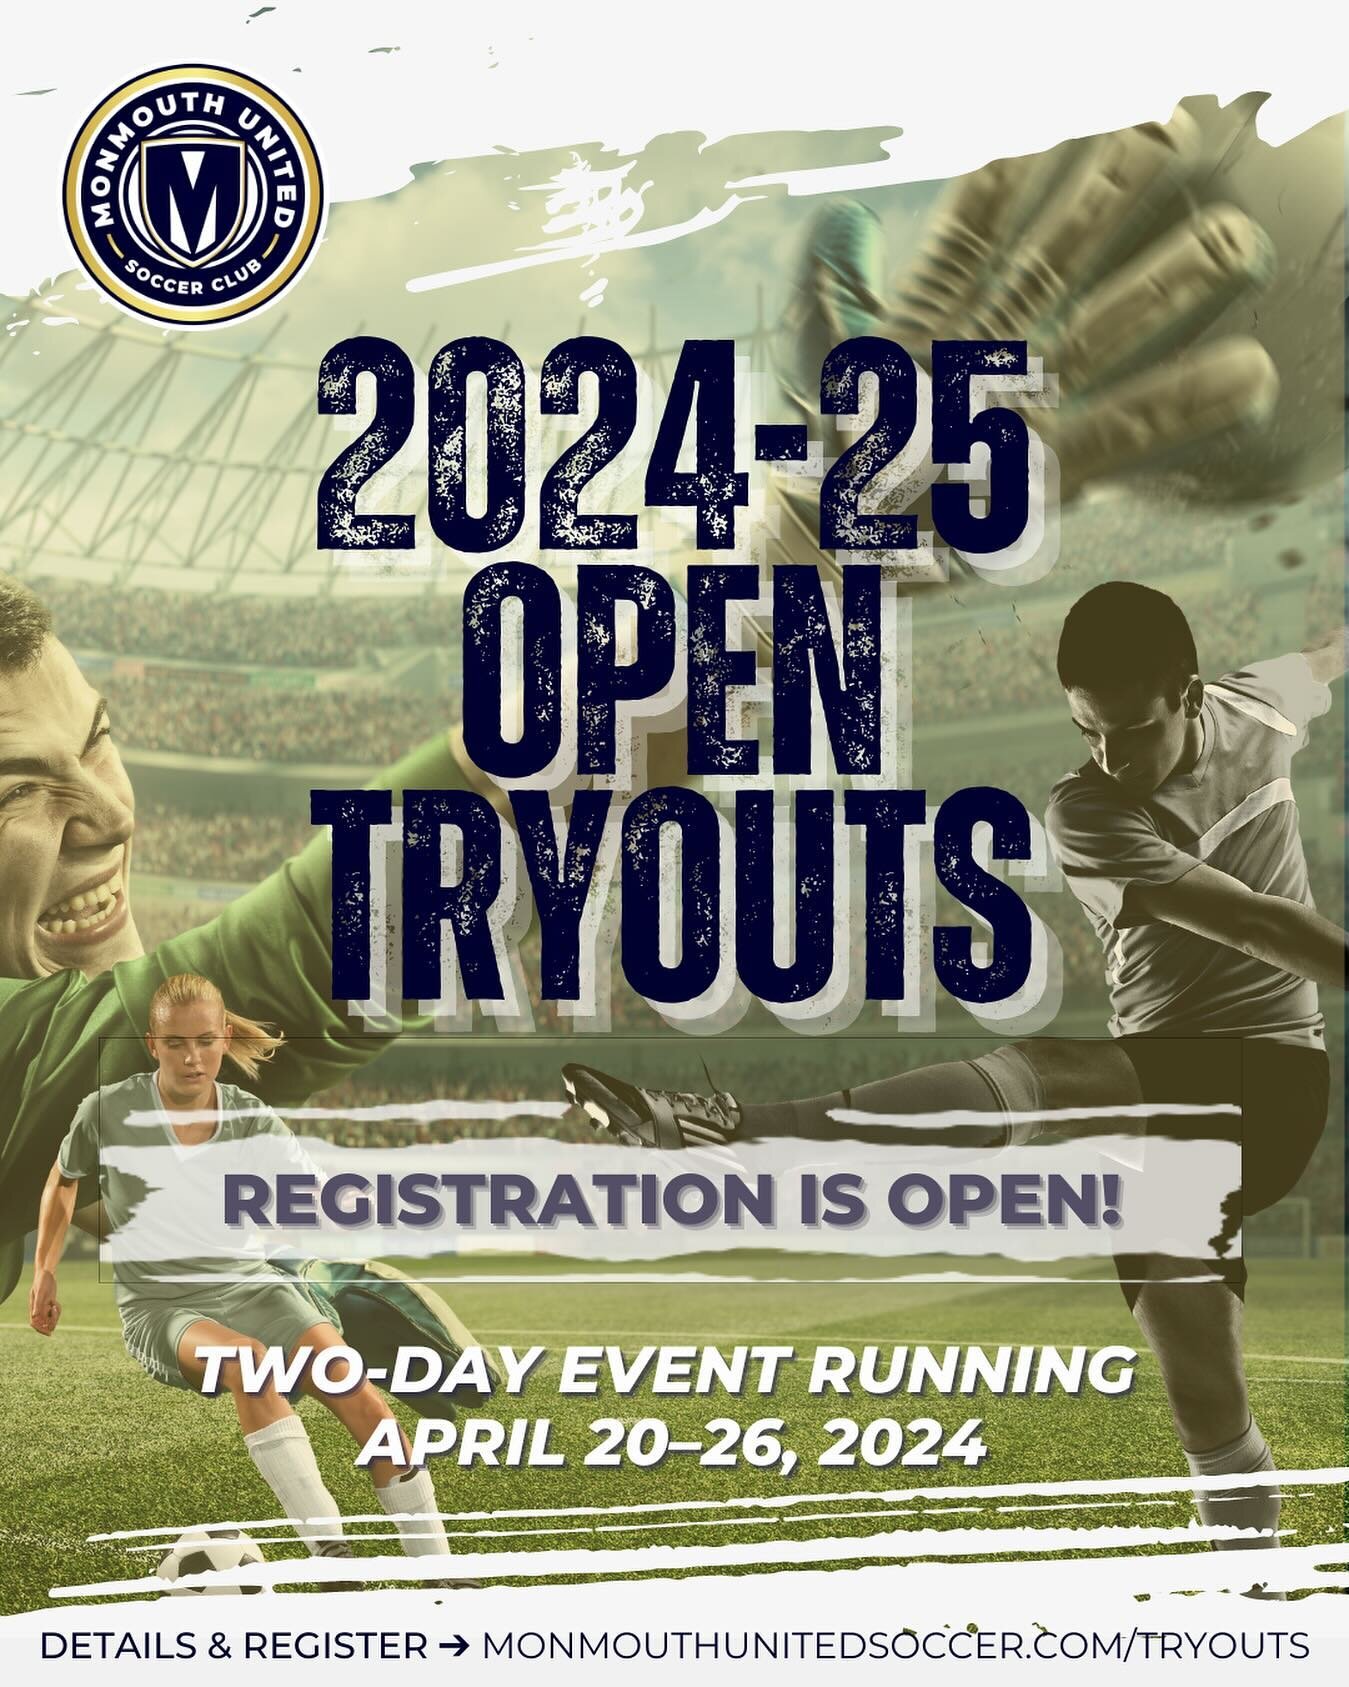 It&rsquo;s miserable out 🌧️. Your kids&rsquo; games were canceled 🚫. You feel a youth soccer void deep in your soul 💔. That in mind, we&rsquo;ve opened tryouts registration today JUST FOR YOU‼️ So pick yourself up, get registered and we&rsquo;ll s